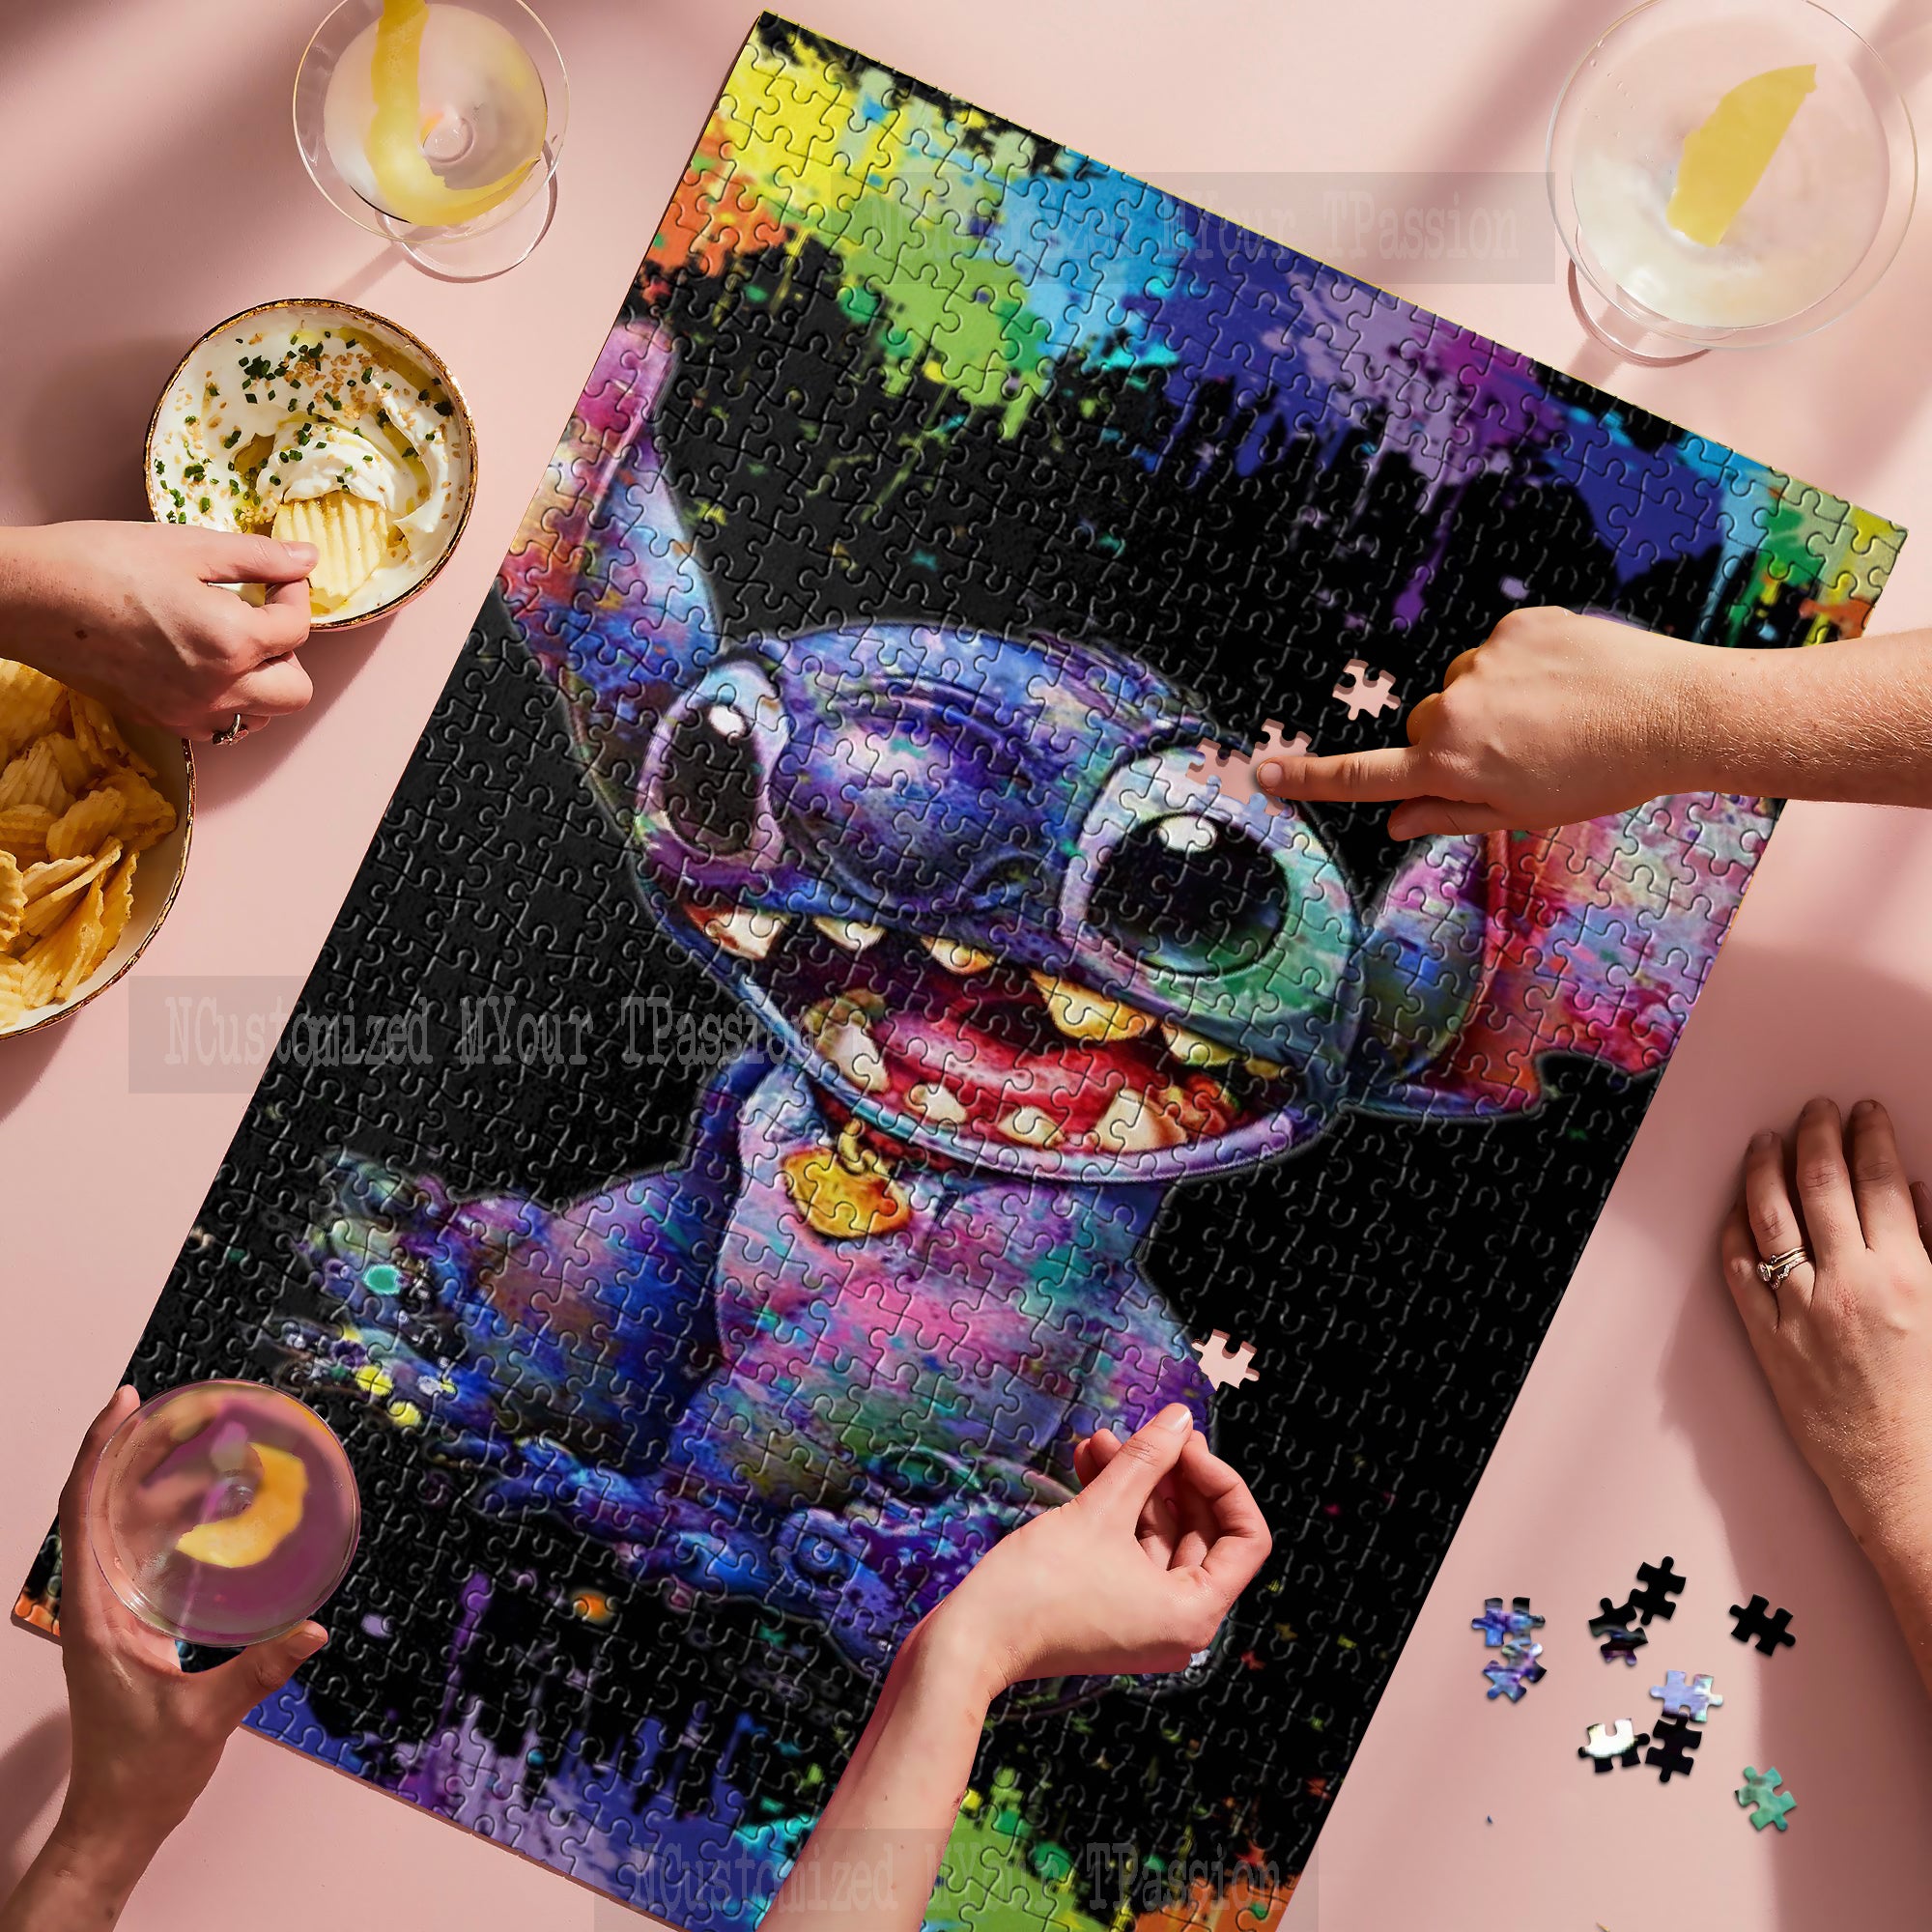 Stitch Amazing Colourful Art Premium Wooden Jigsaw Puzzle, Stitch Puzzle,  Disney Lovers in 500 pieces, 1000 pieces – PICK CLICK